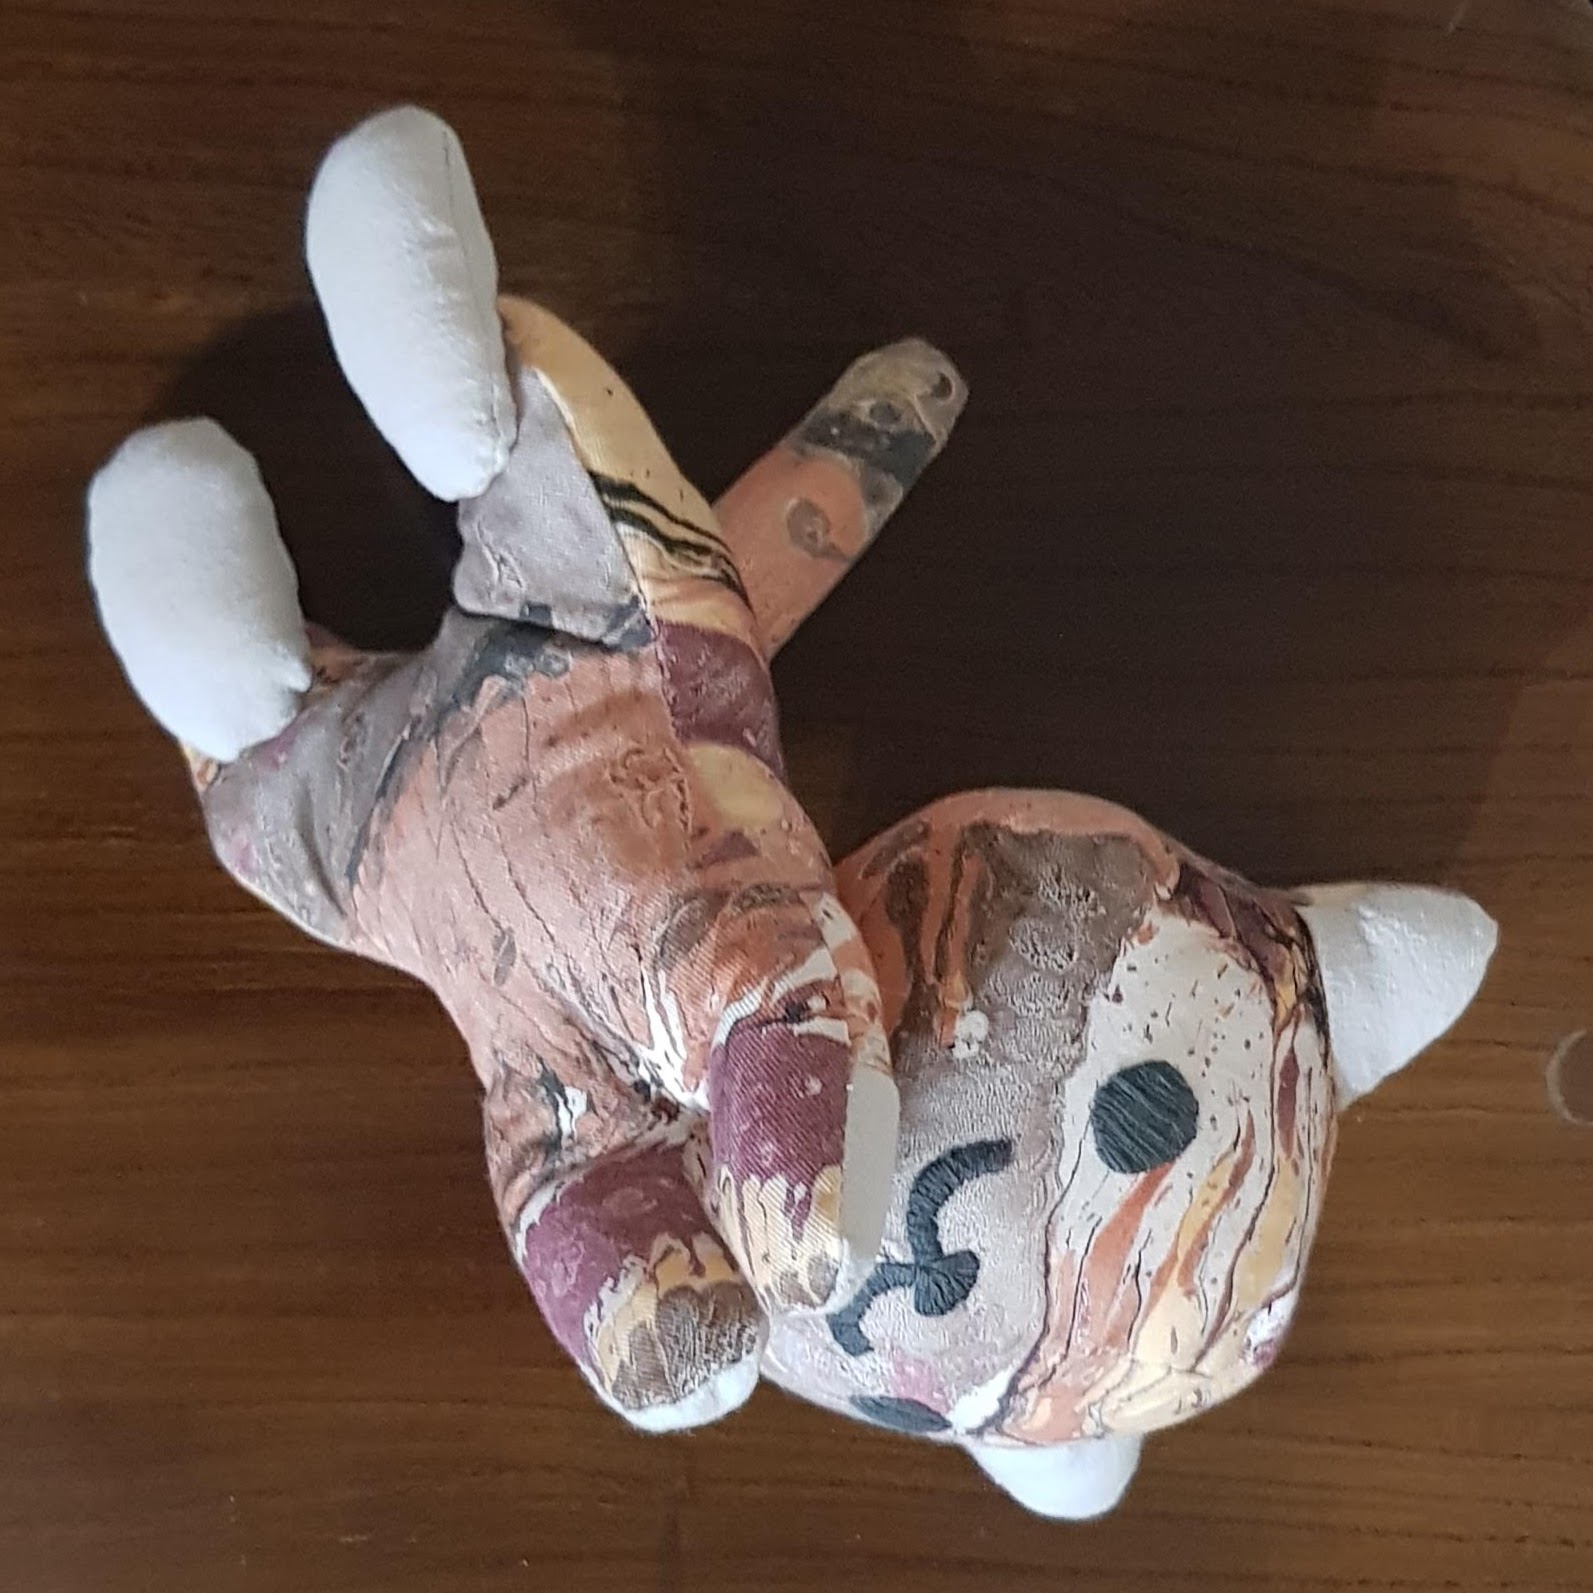 Same plush cat as above. This time the stomach is visible as the cat is somewhat on it's back. The cat looks playful.